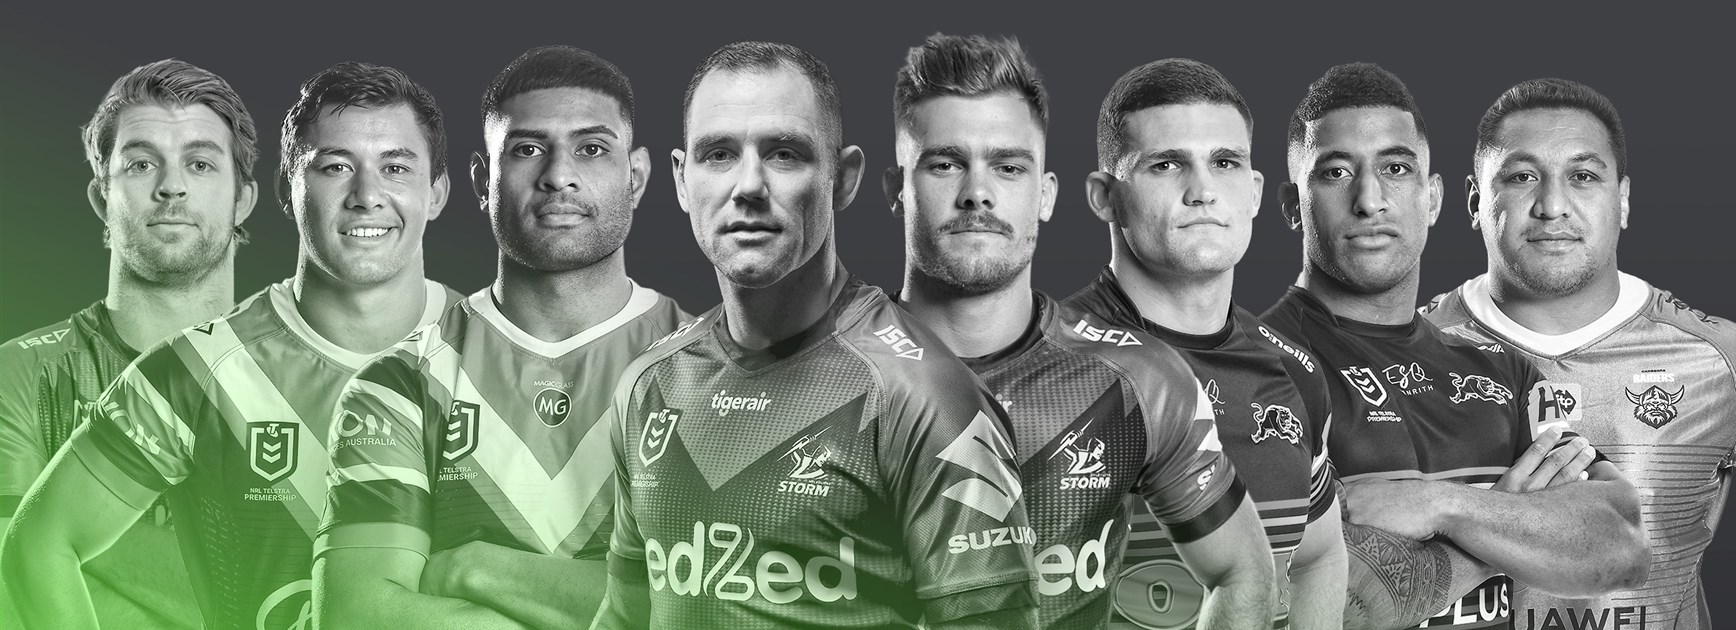 NRL 2020: Storm surge in Team of the Year